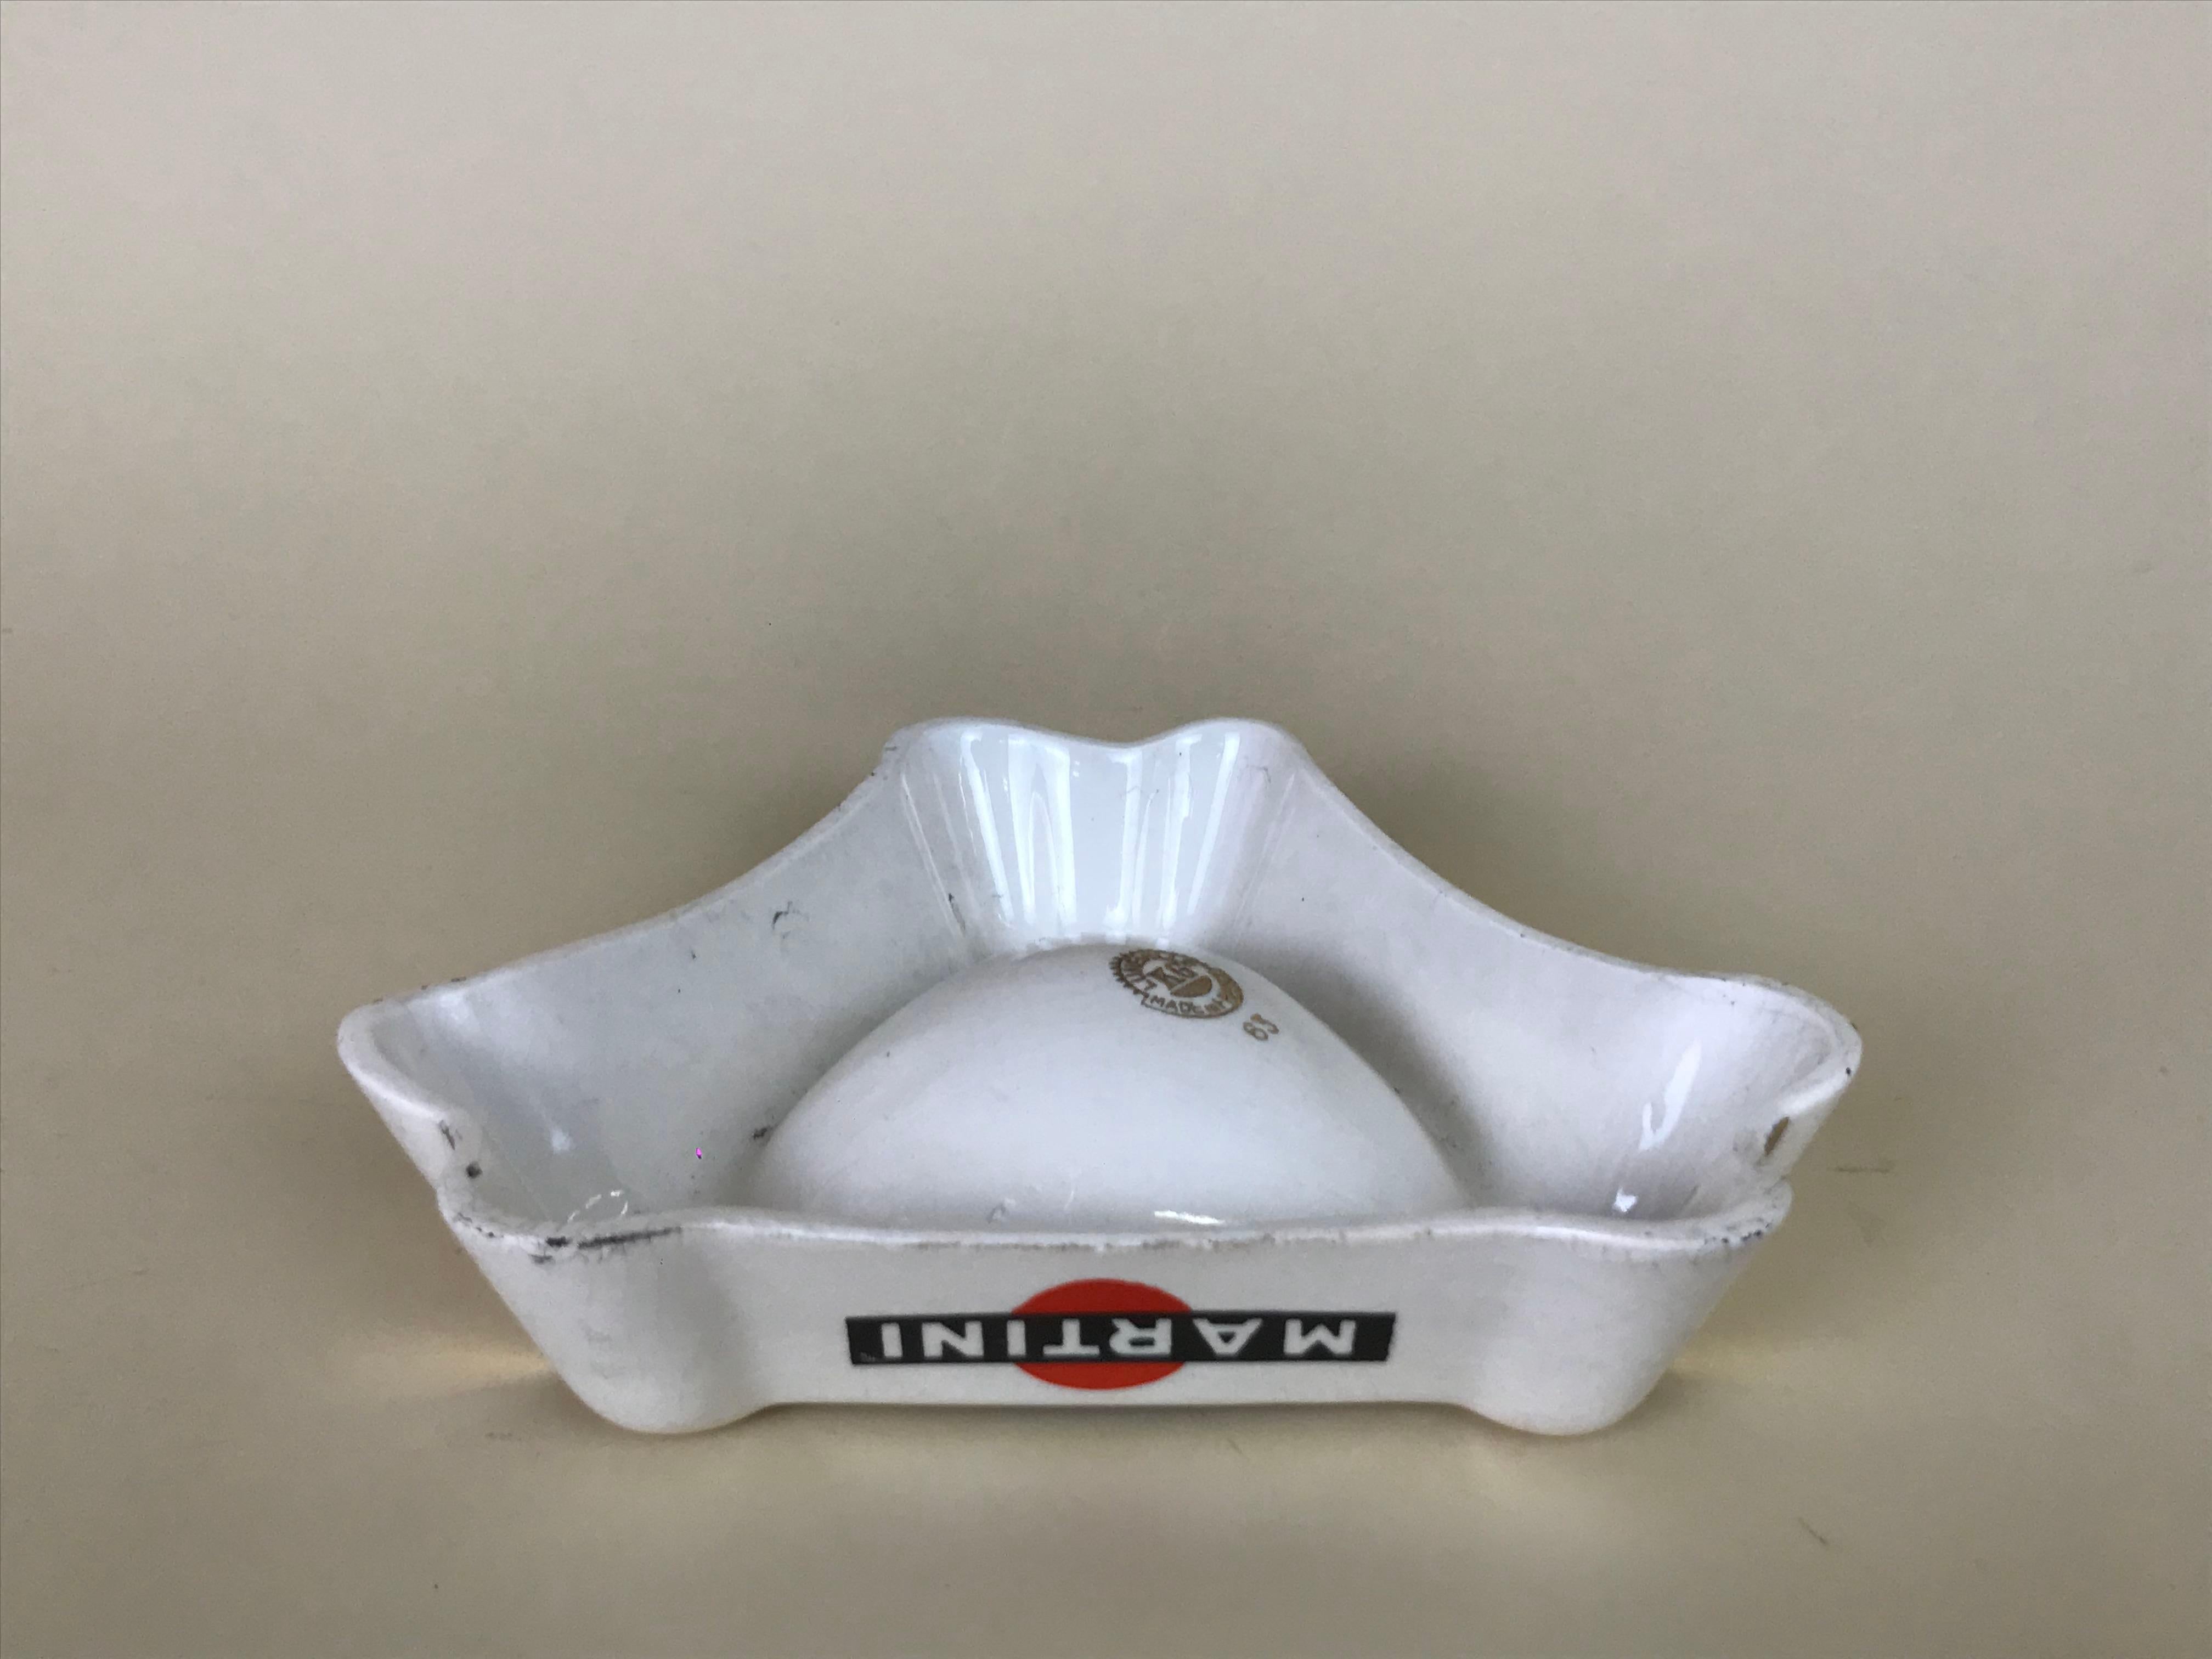 1950s French White Martini Earthenware Advertising Ashtray by Luneville Faience For Sale 6